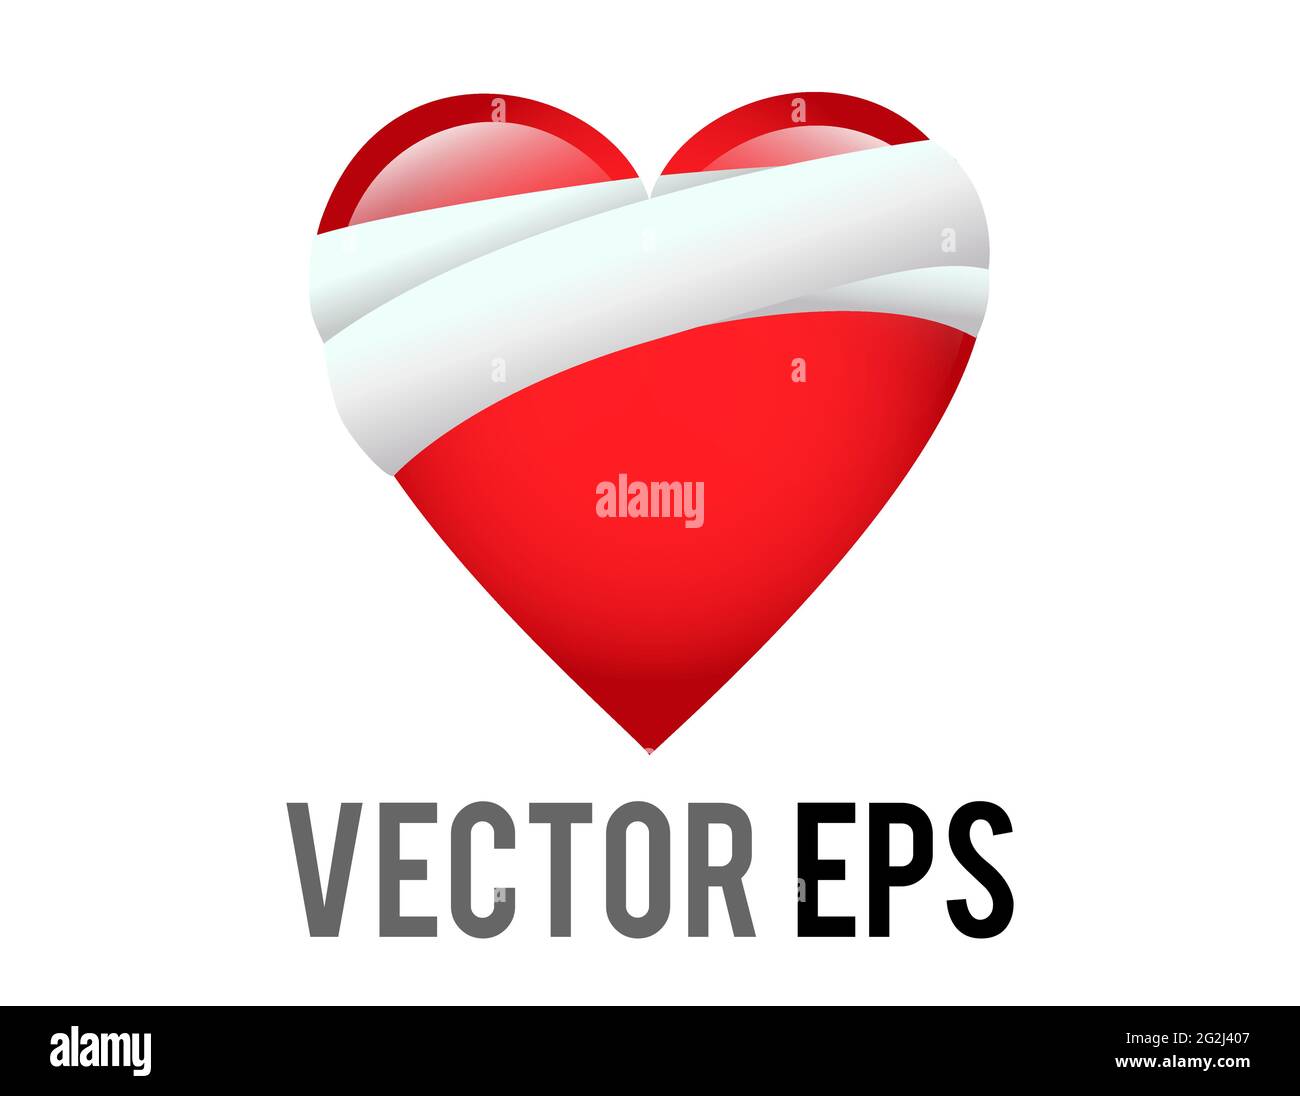 The isolated vector classic love red glossy mending heart icon with bandage across one side, used for healing, recovery, or to express sympathy for so Stock Vector